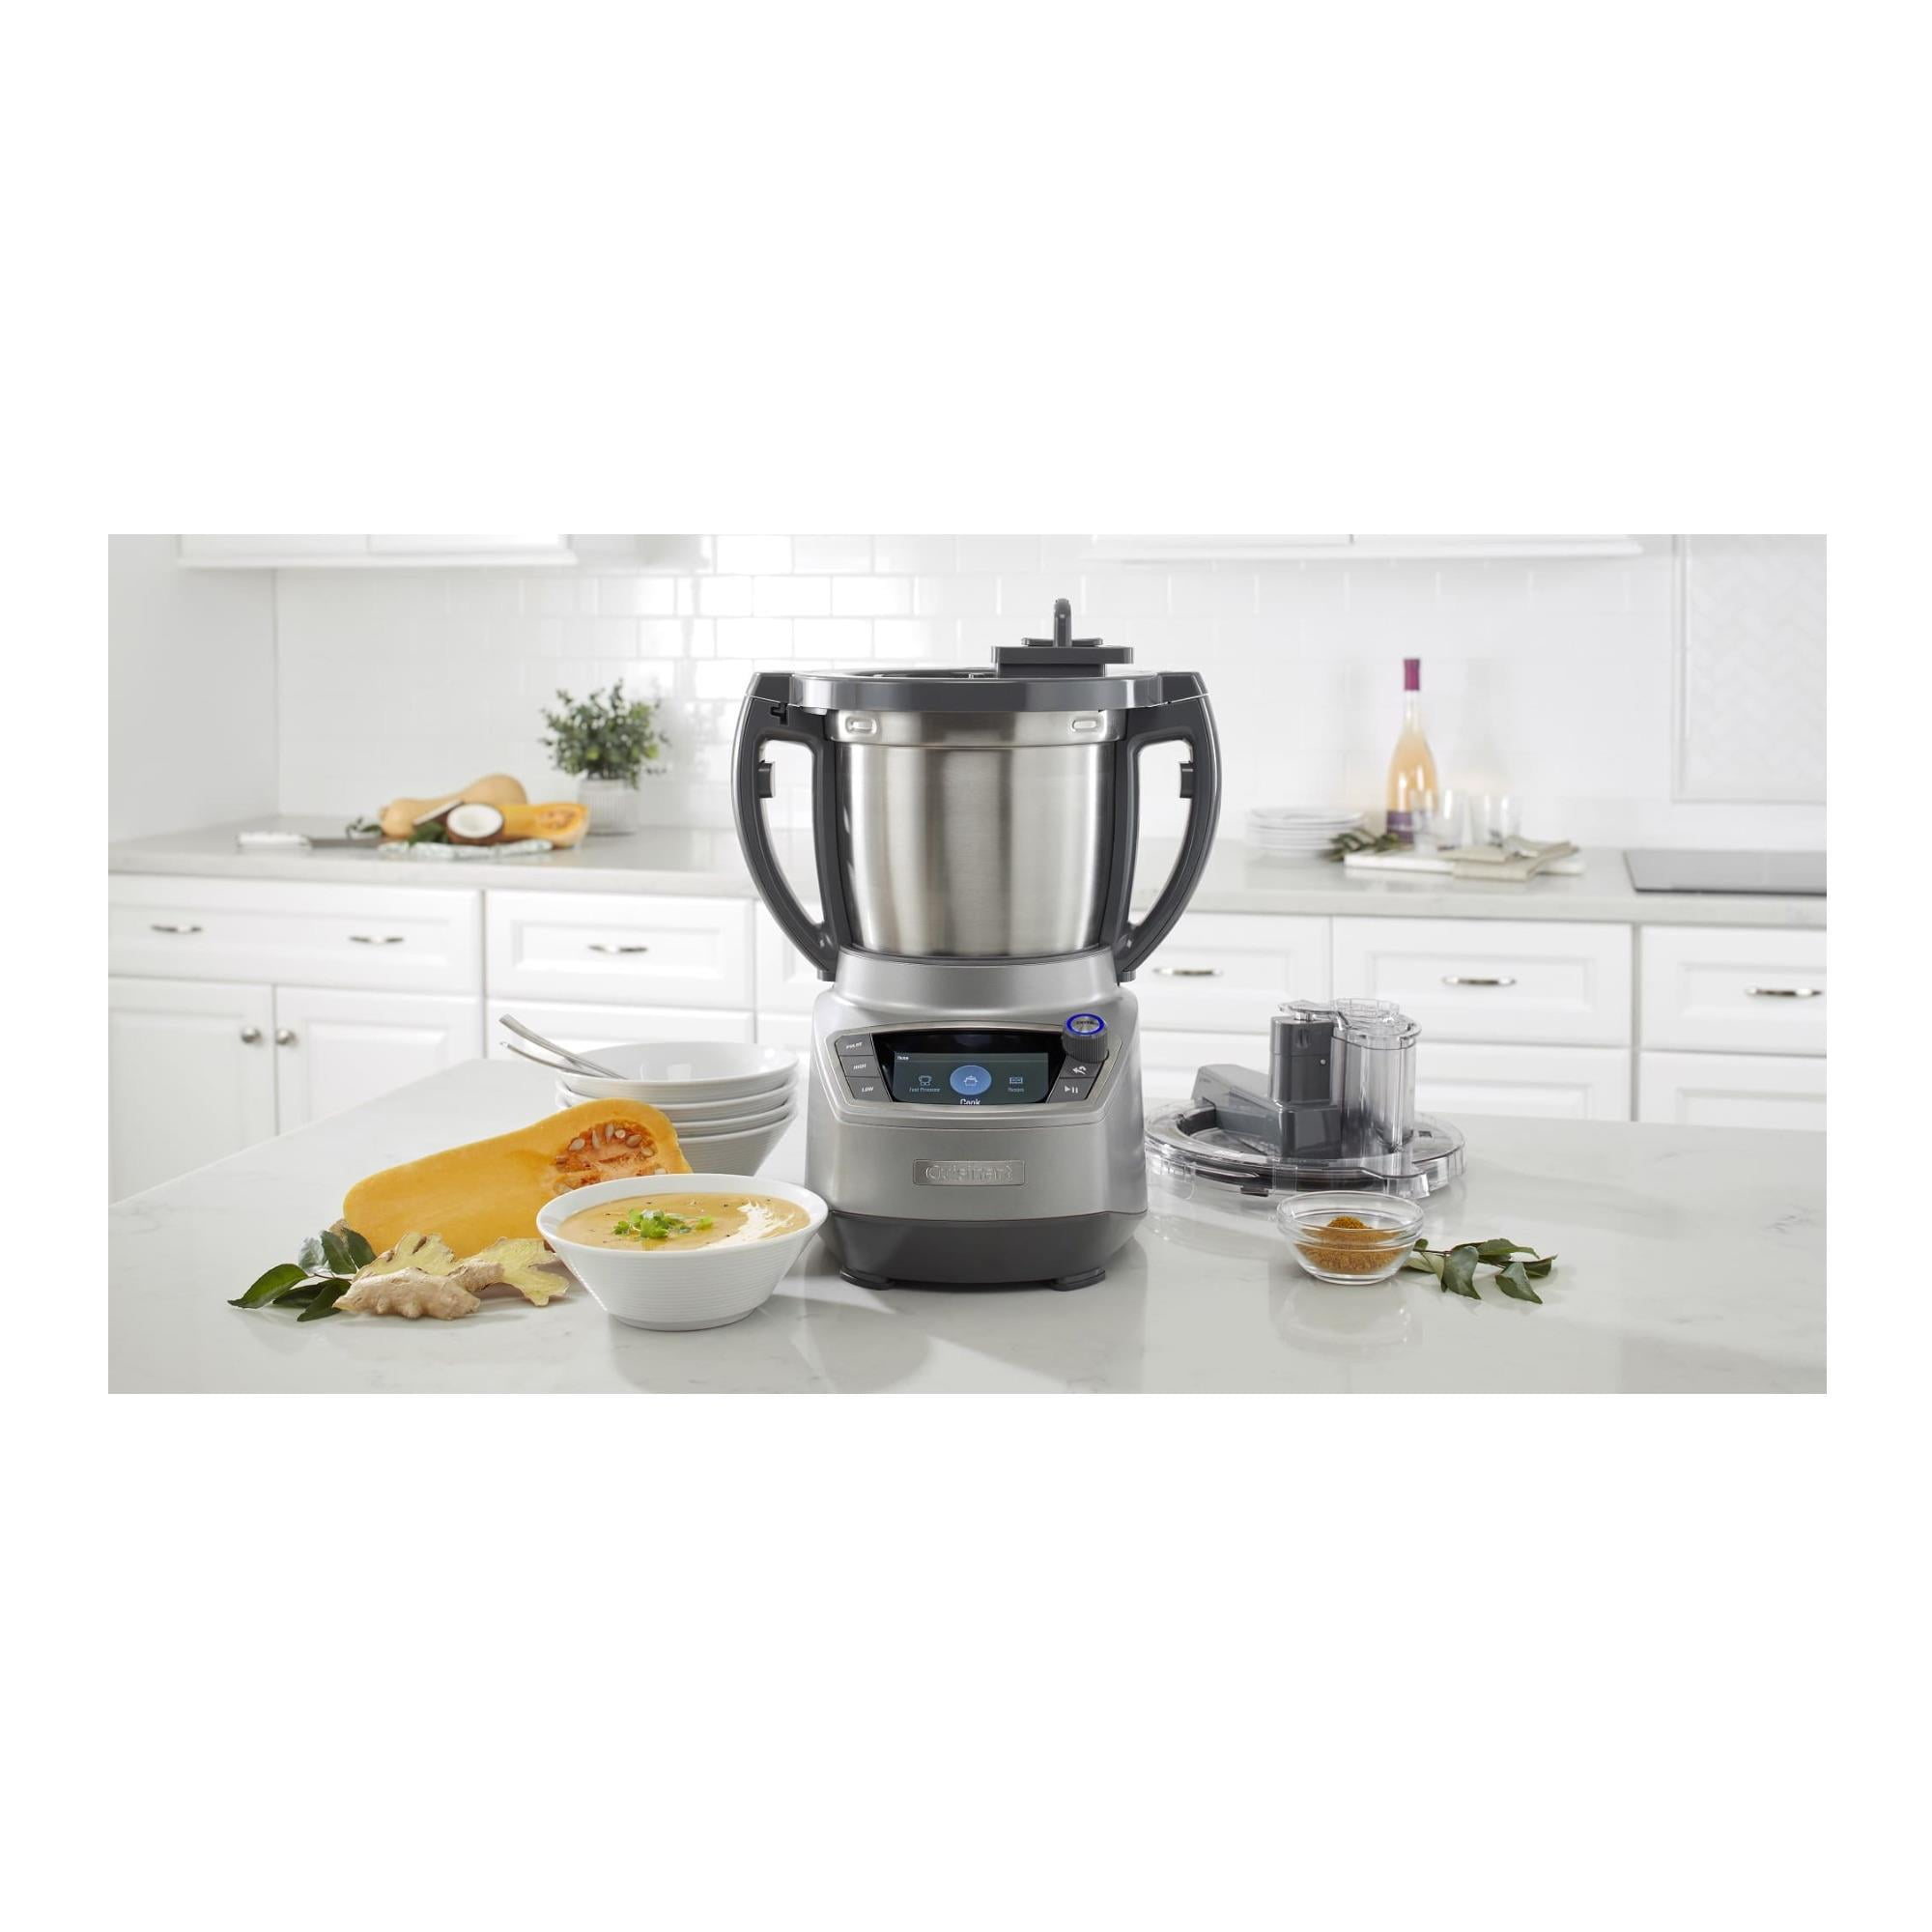 Cuisinart Complete Chef Cooking Food Processor